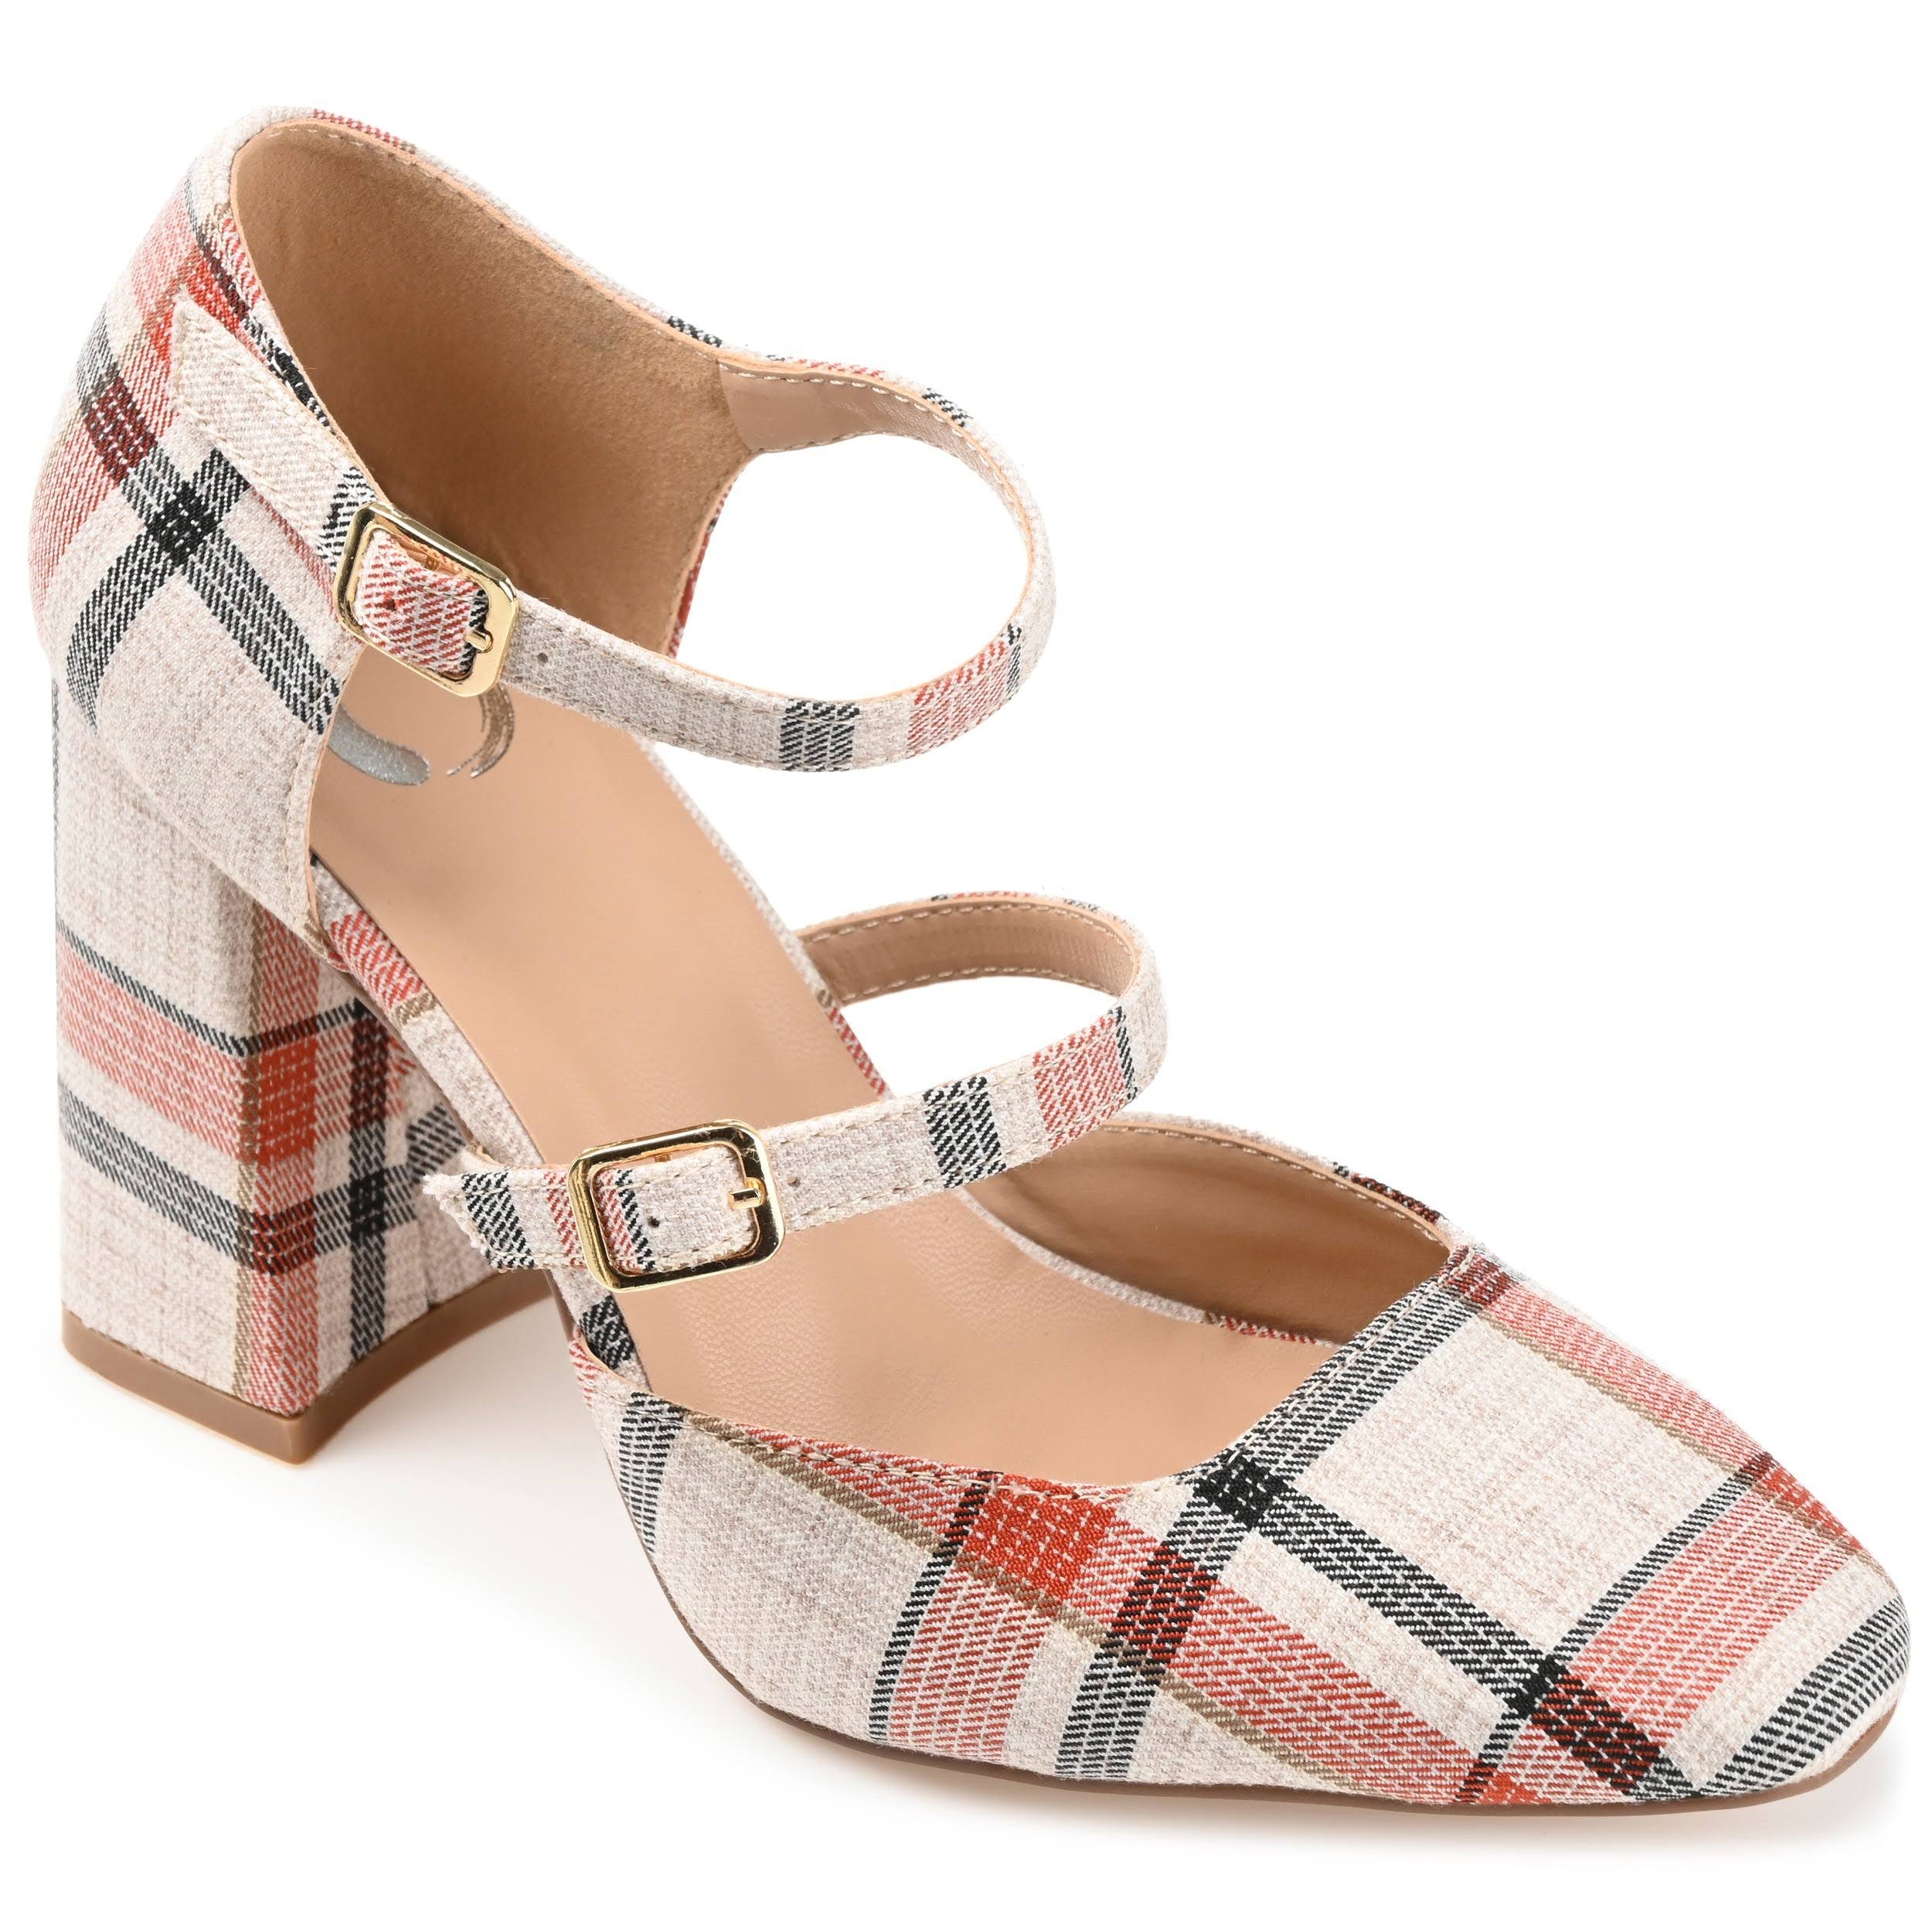 Comfortable Padded Plaid Pump by Journee Collection | Image